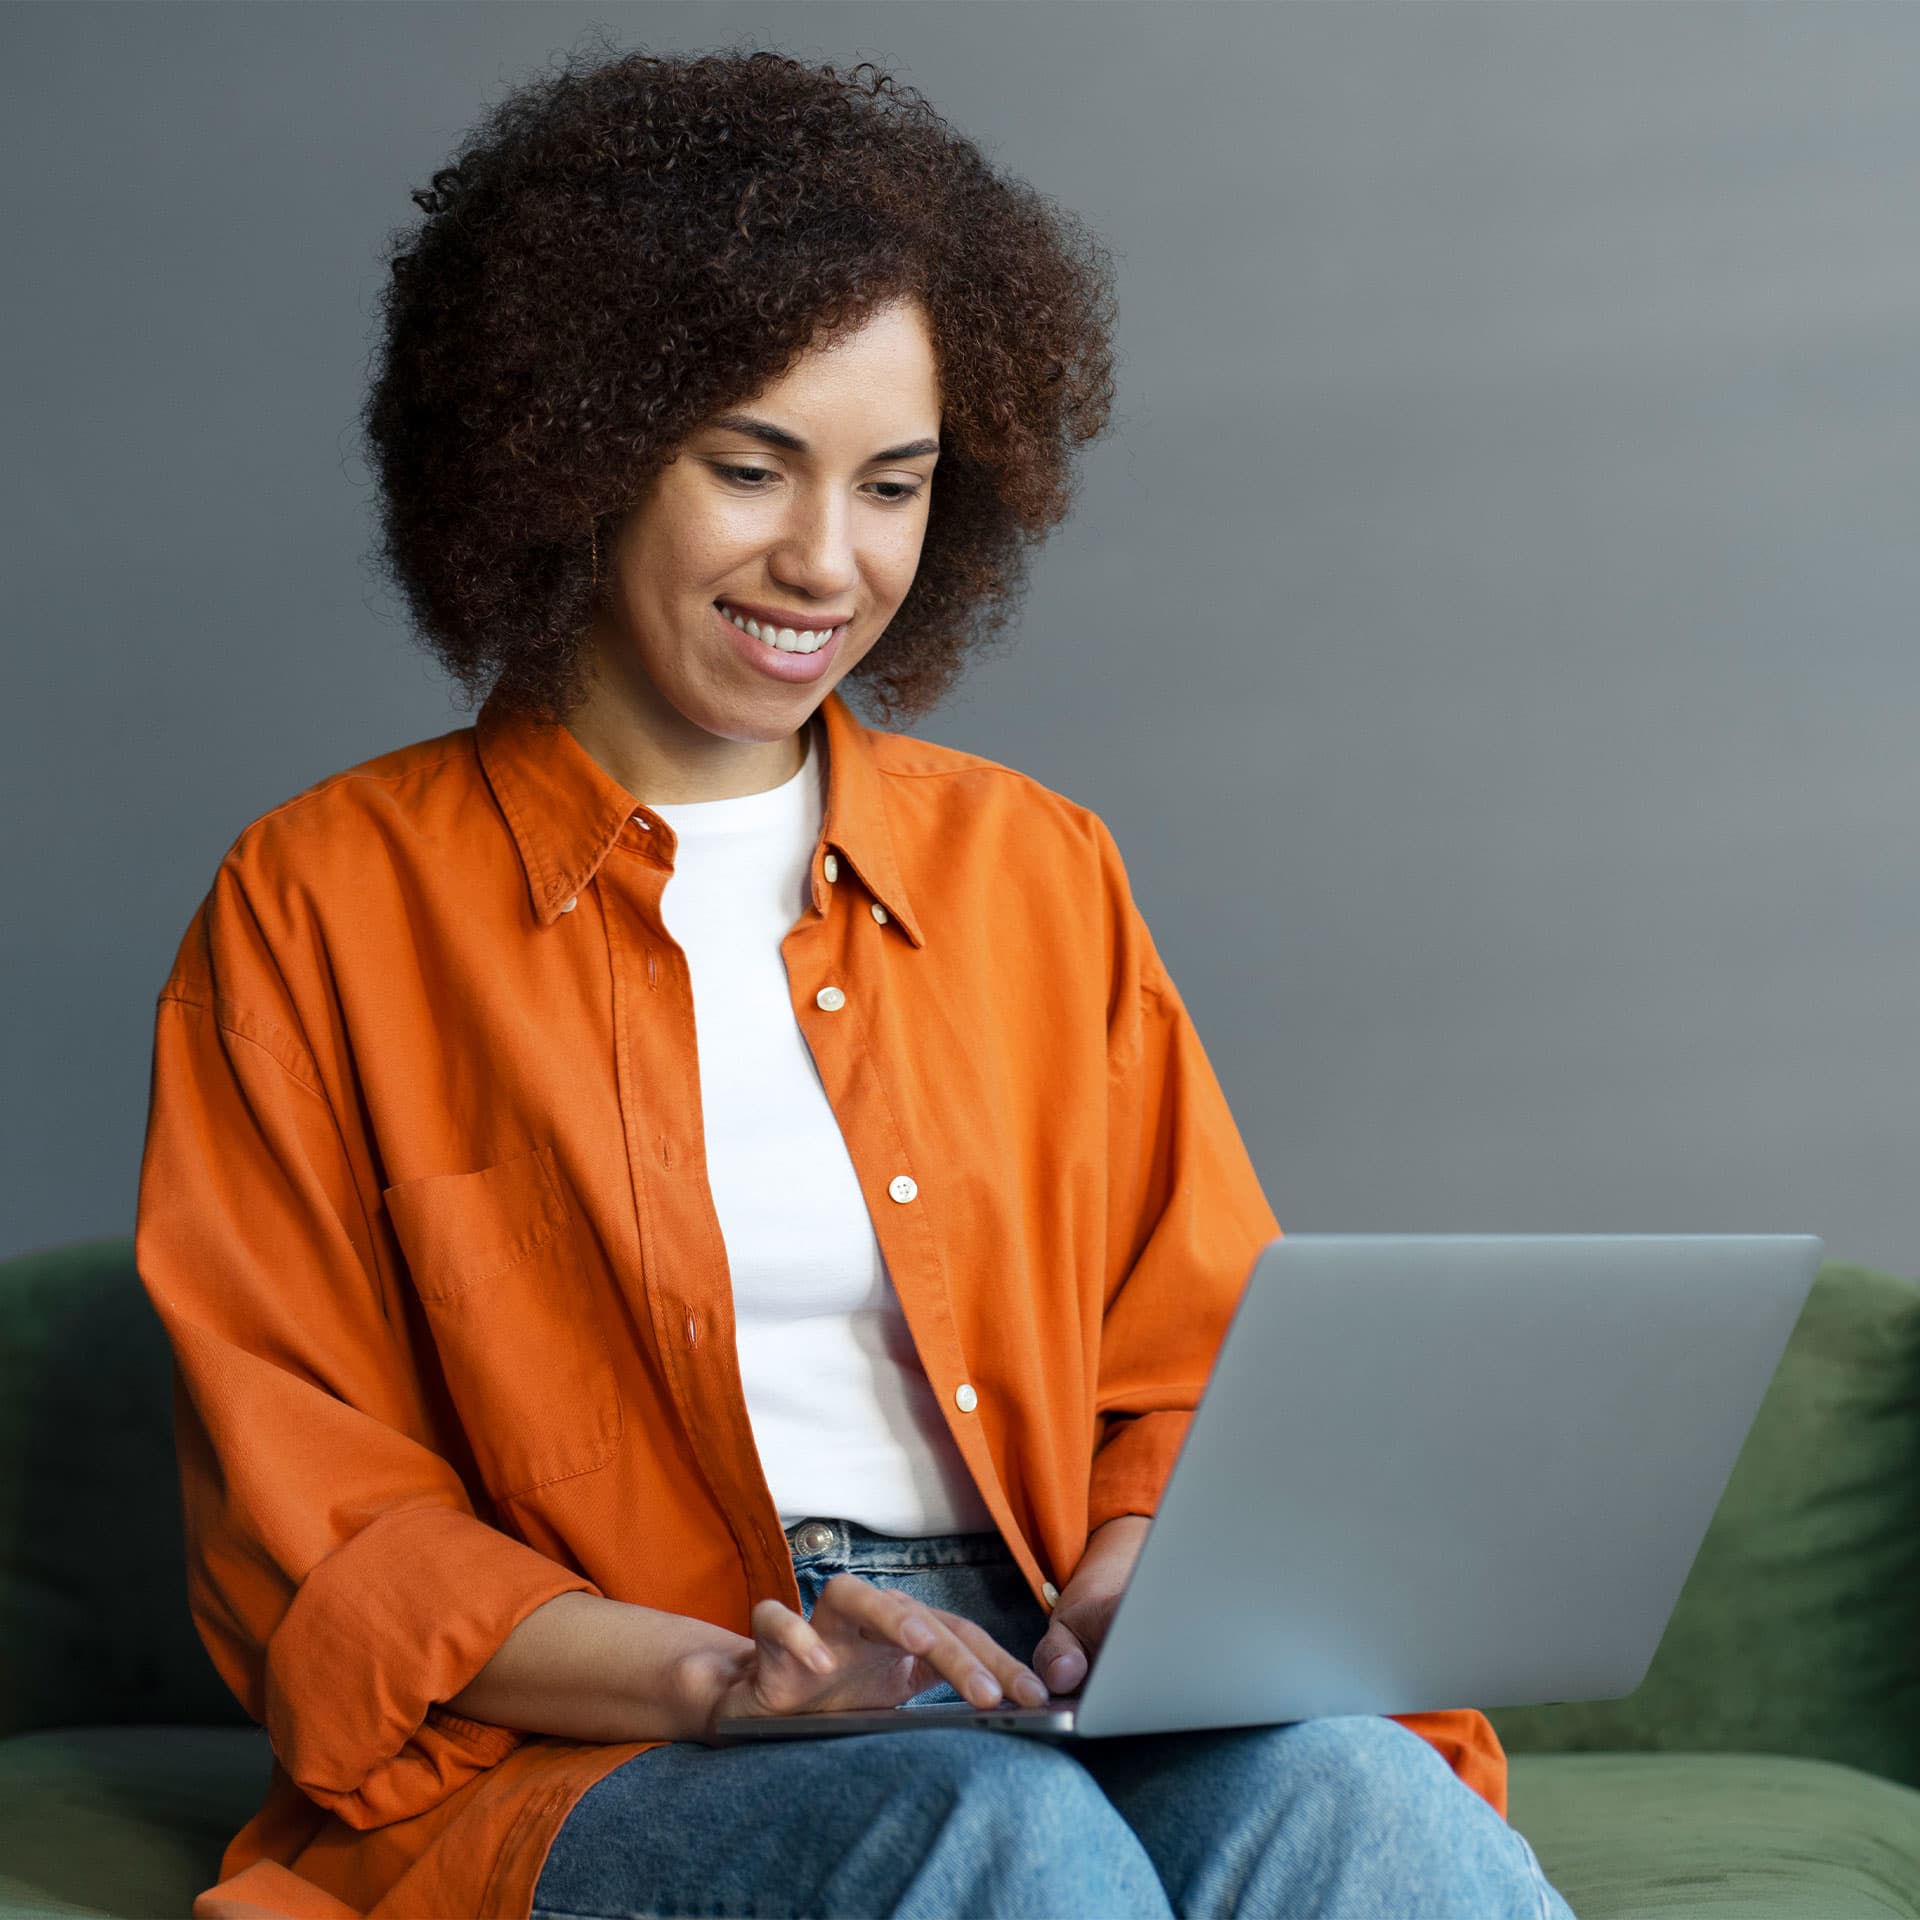 A woman sitting on the sofa, smiling and looking at her laptop.